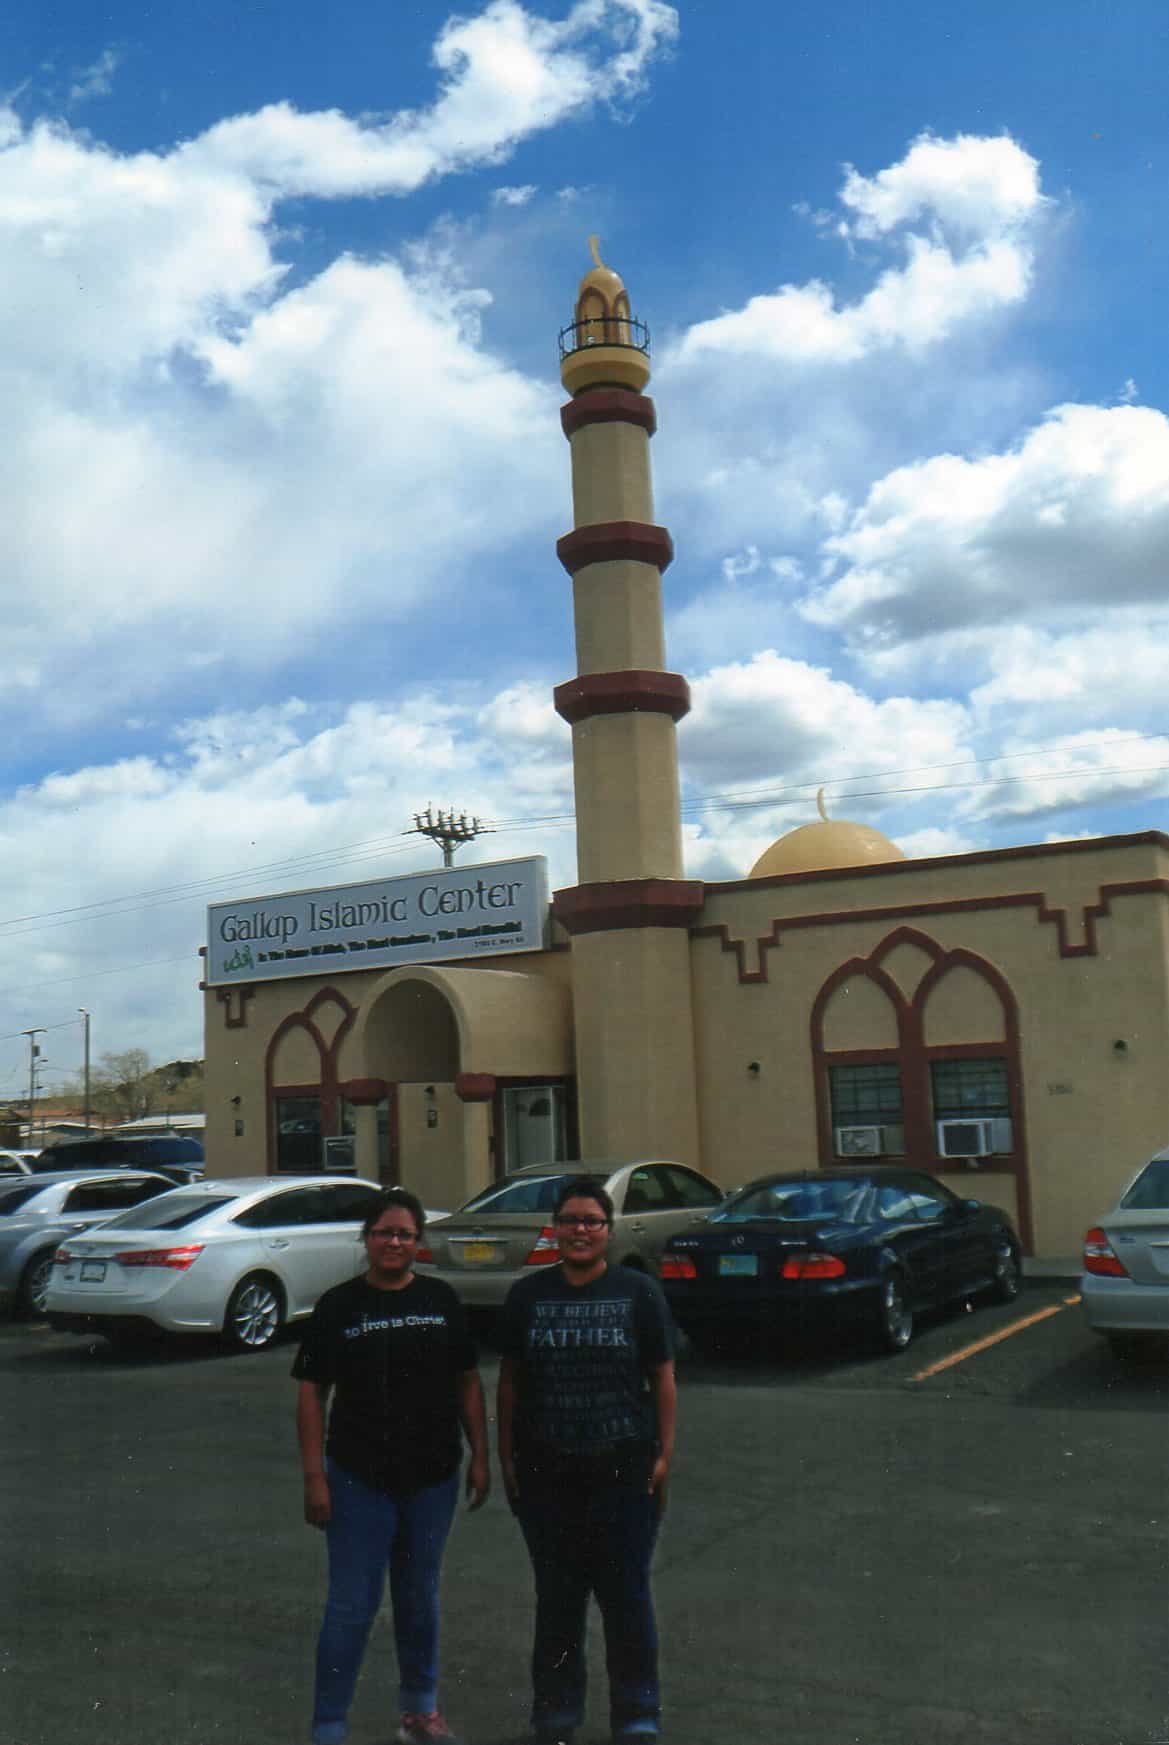 Mosque in Gallup